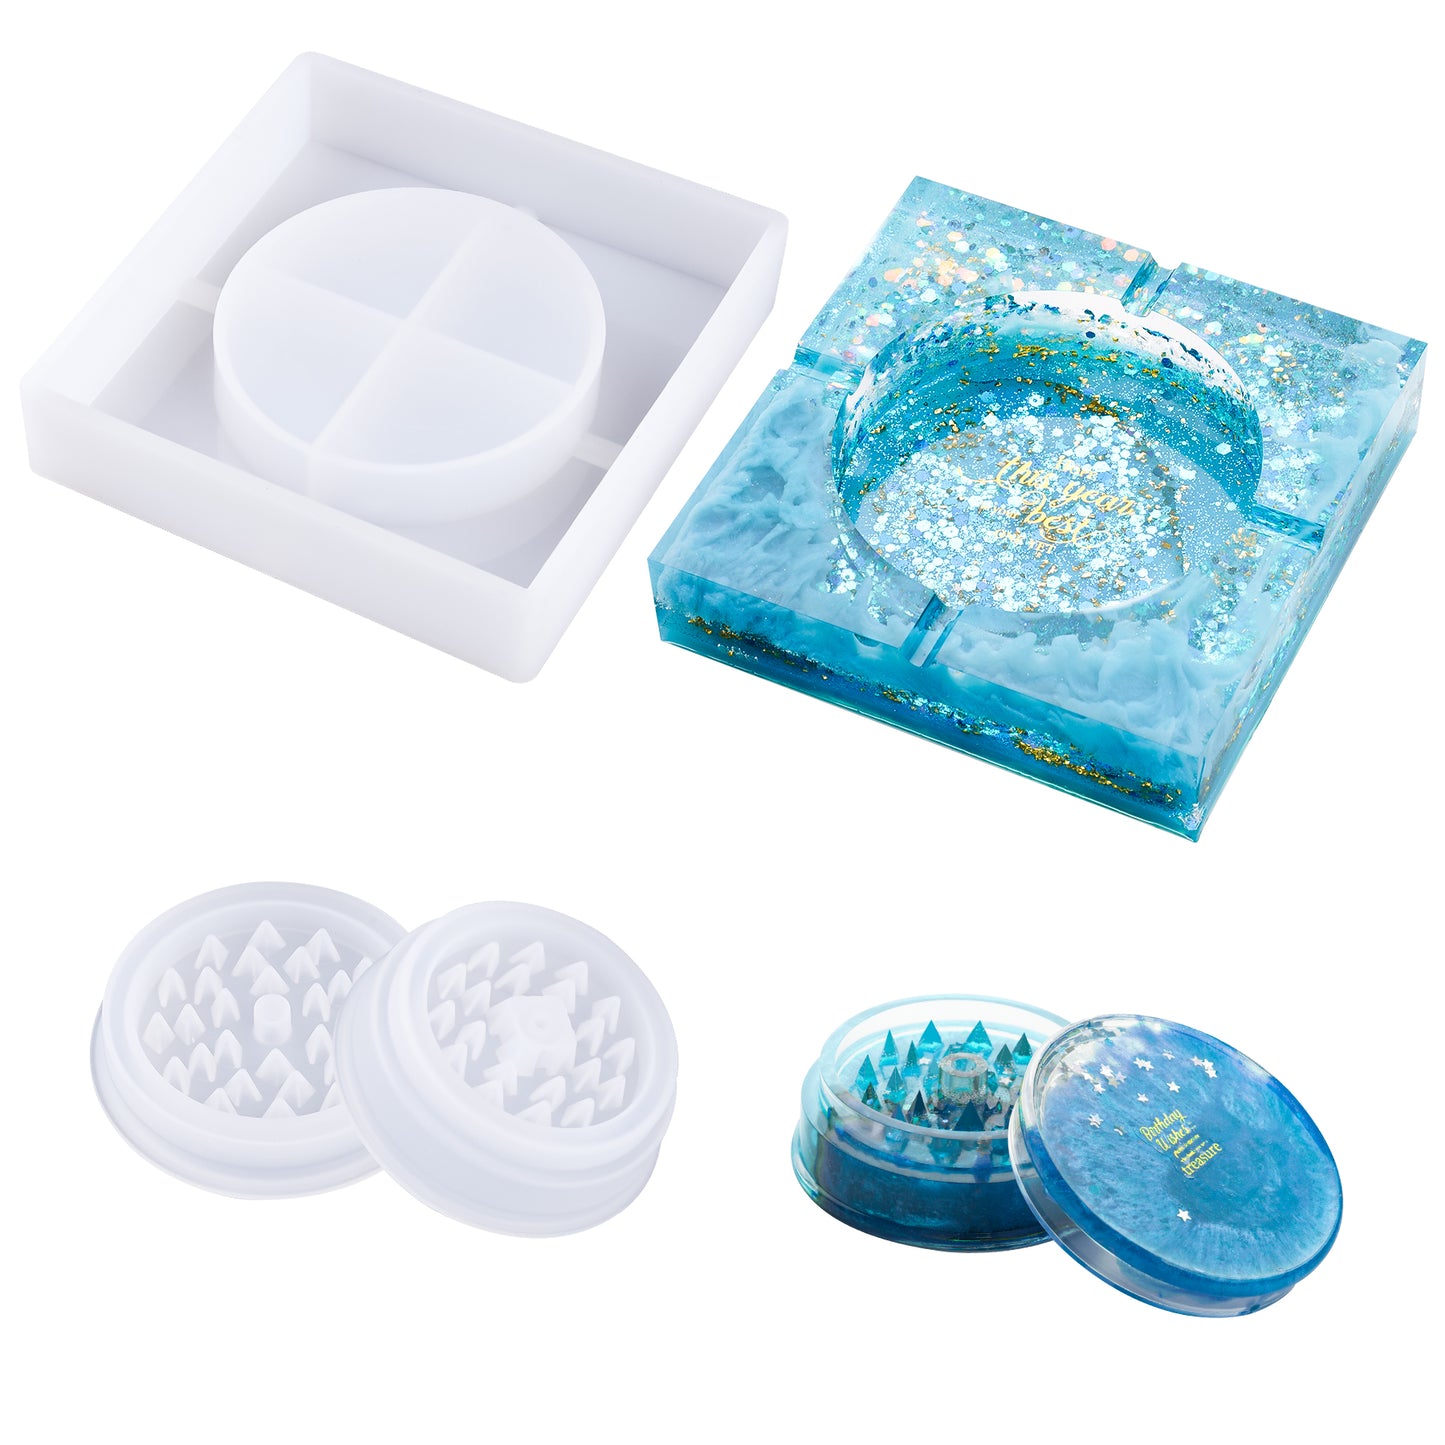 Epoxy Resin DIY Casting Silicone Mold Kit 2.87" Herb Grinder+5" Large Square A